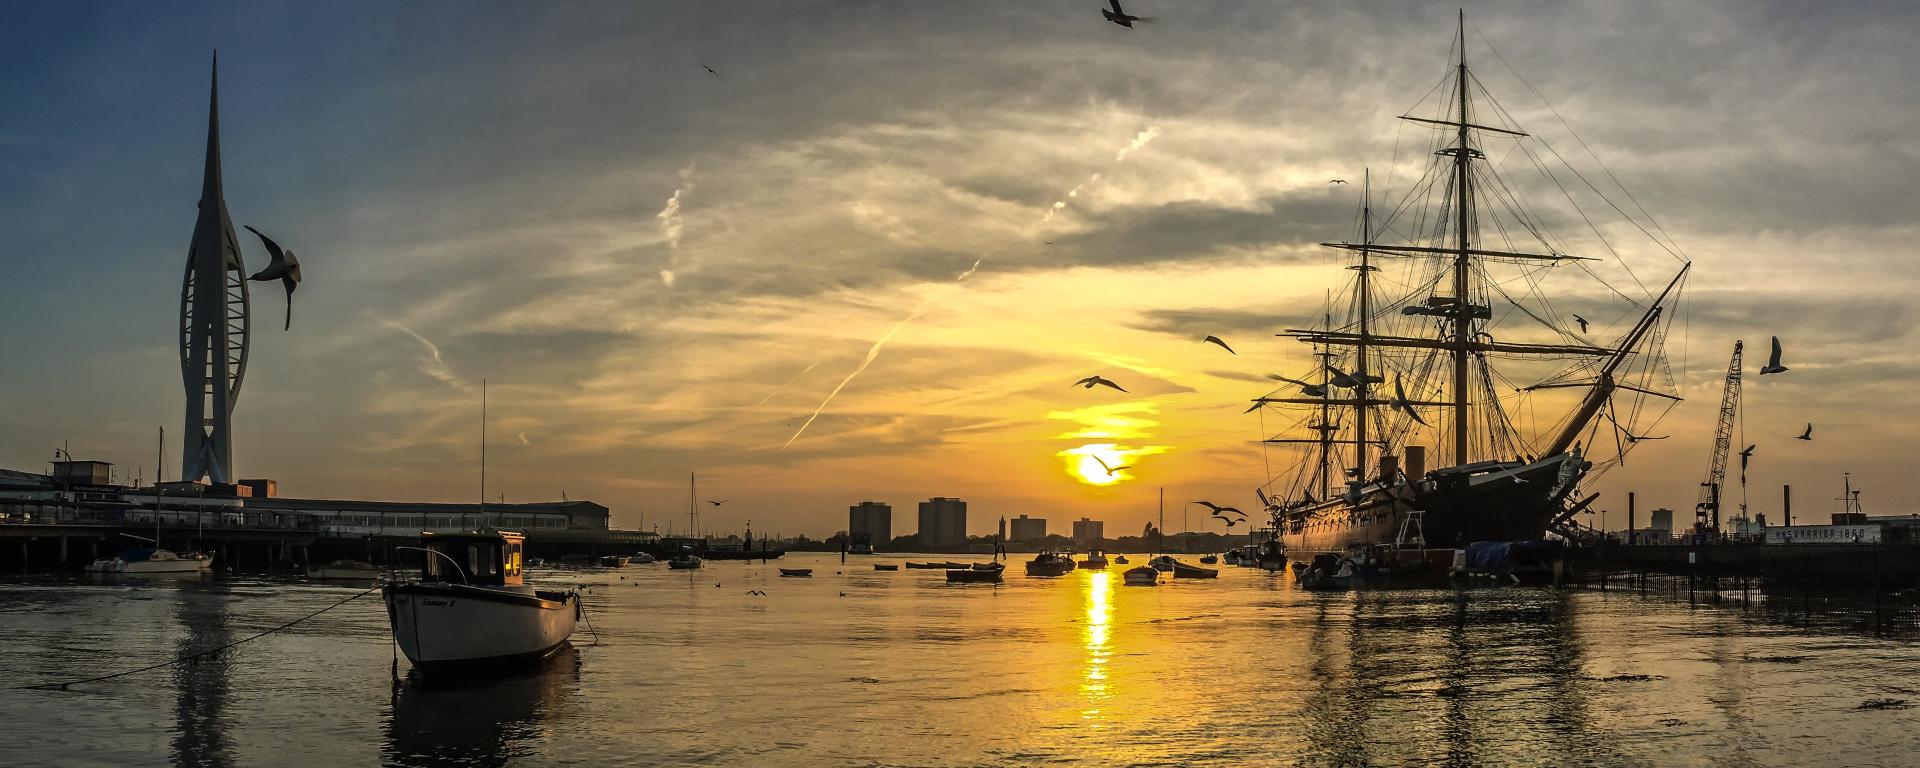 HMS Warrior - Golden Sunset by S Roster